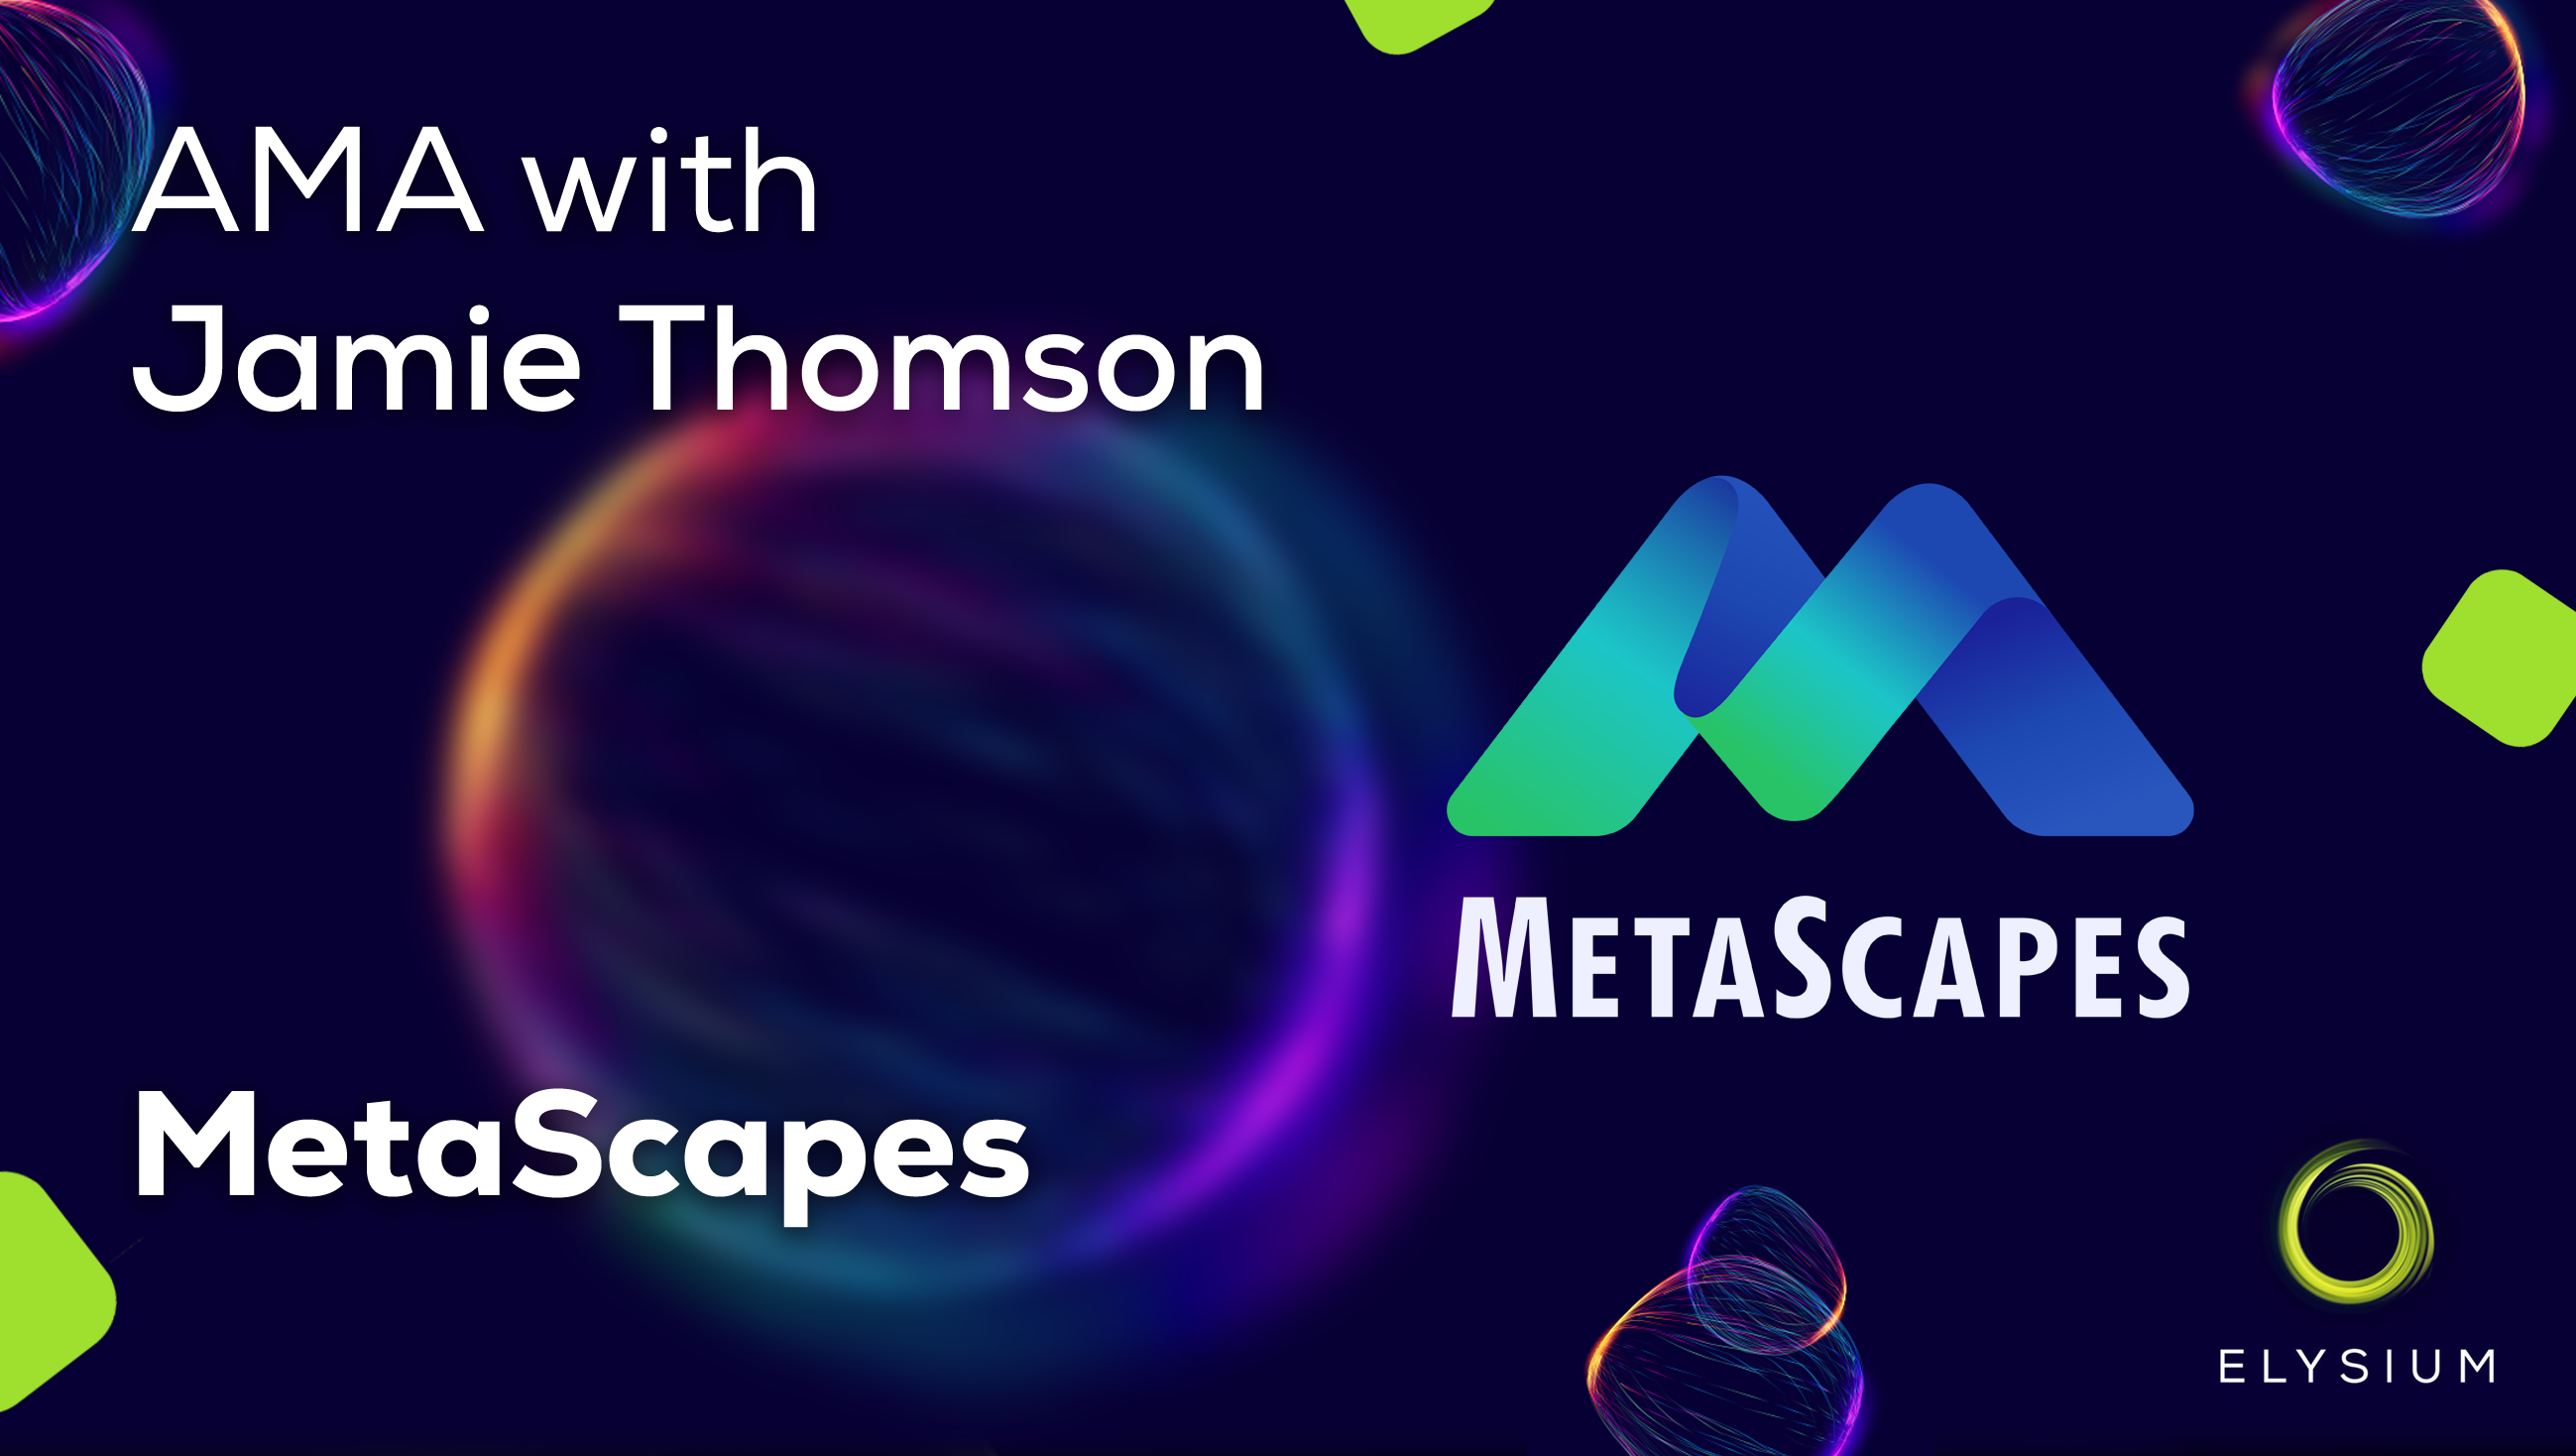 MetaScapes AMA